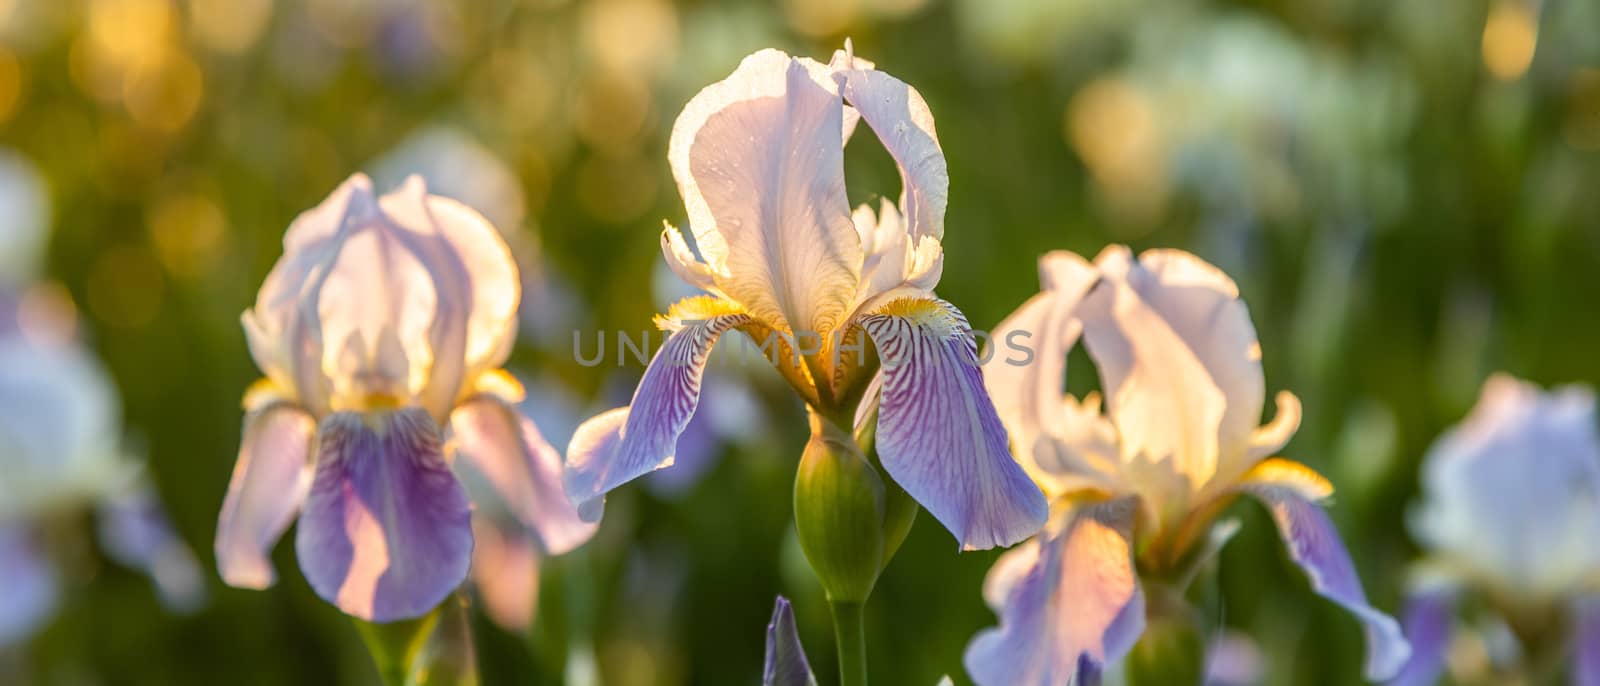 lilac irises flowers on the field in the sunlight by sveter